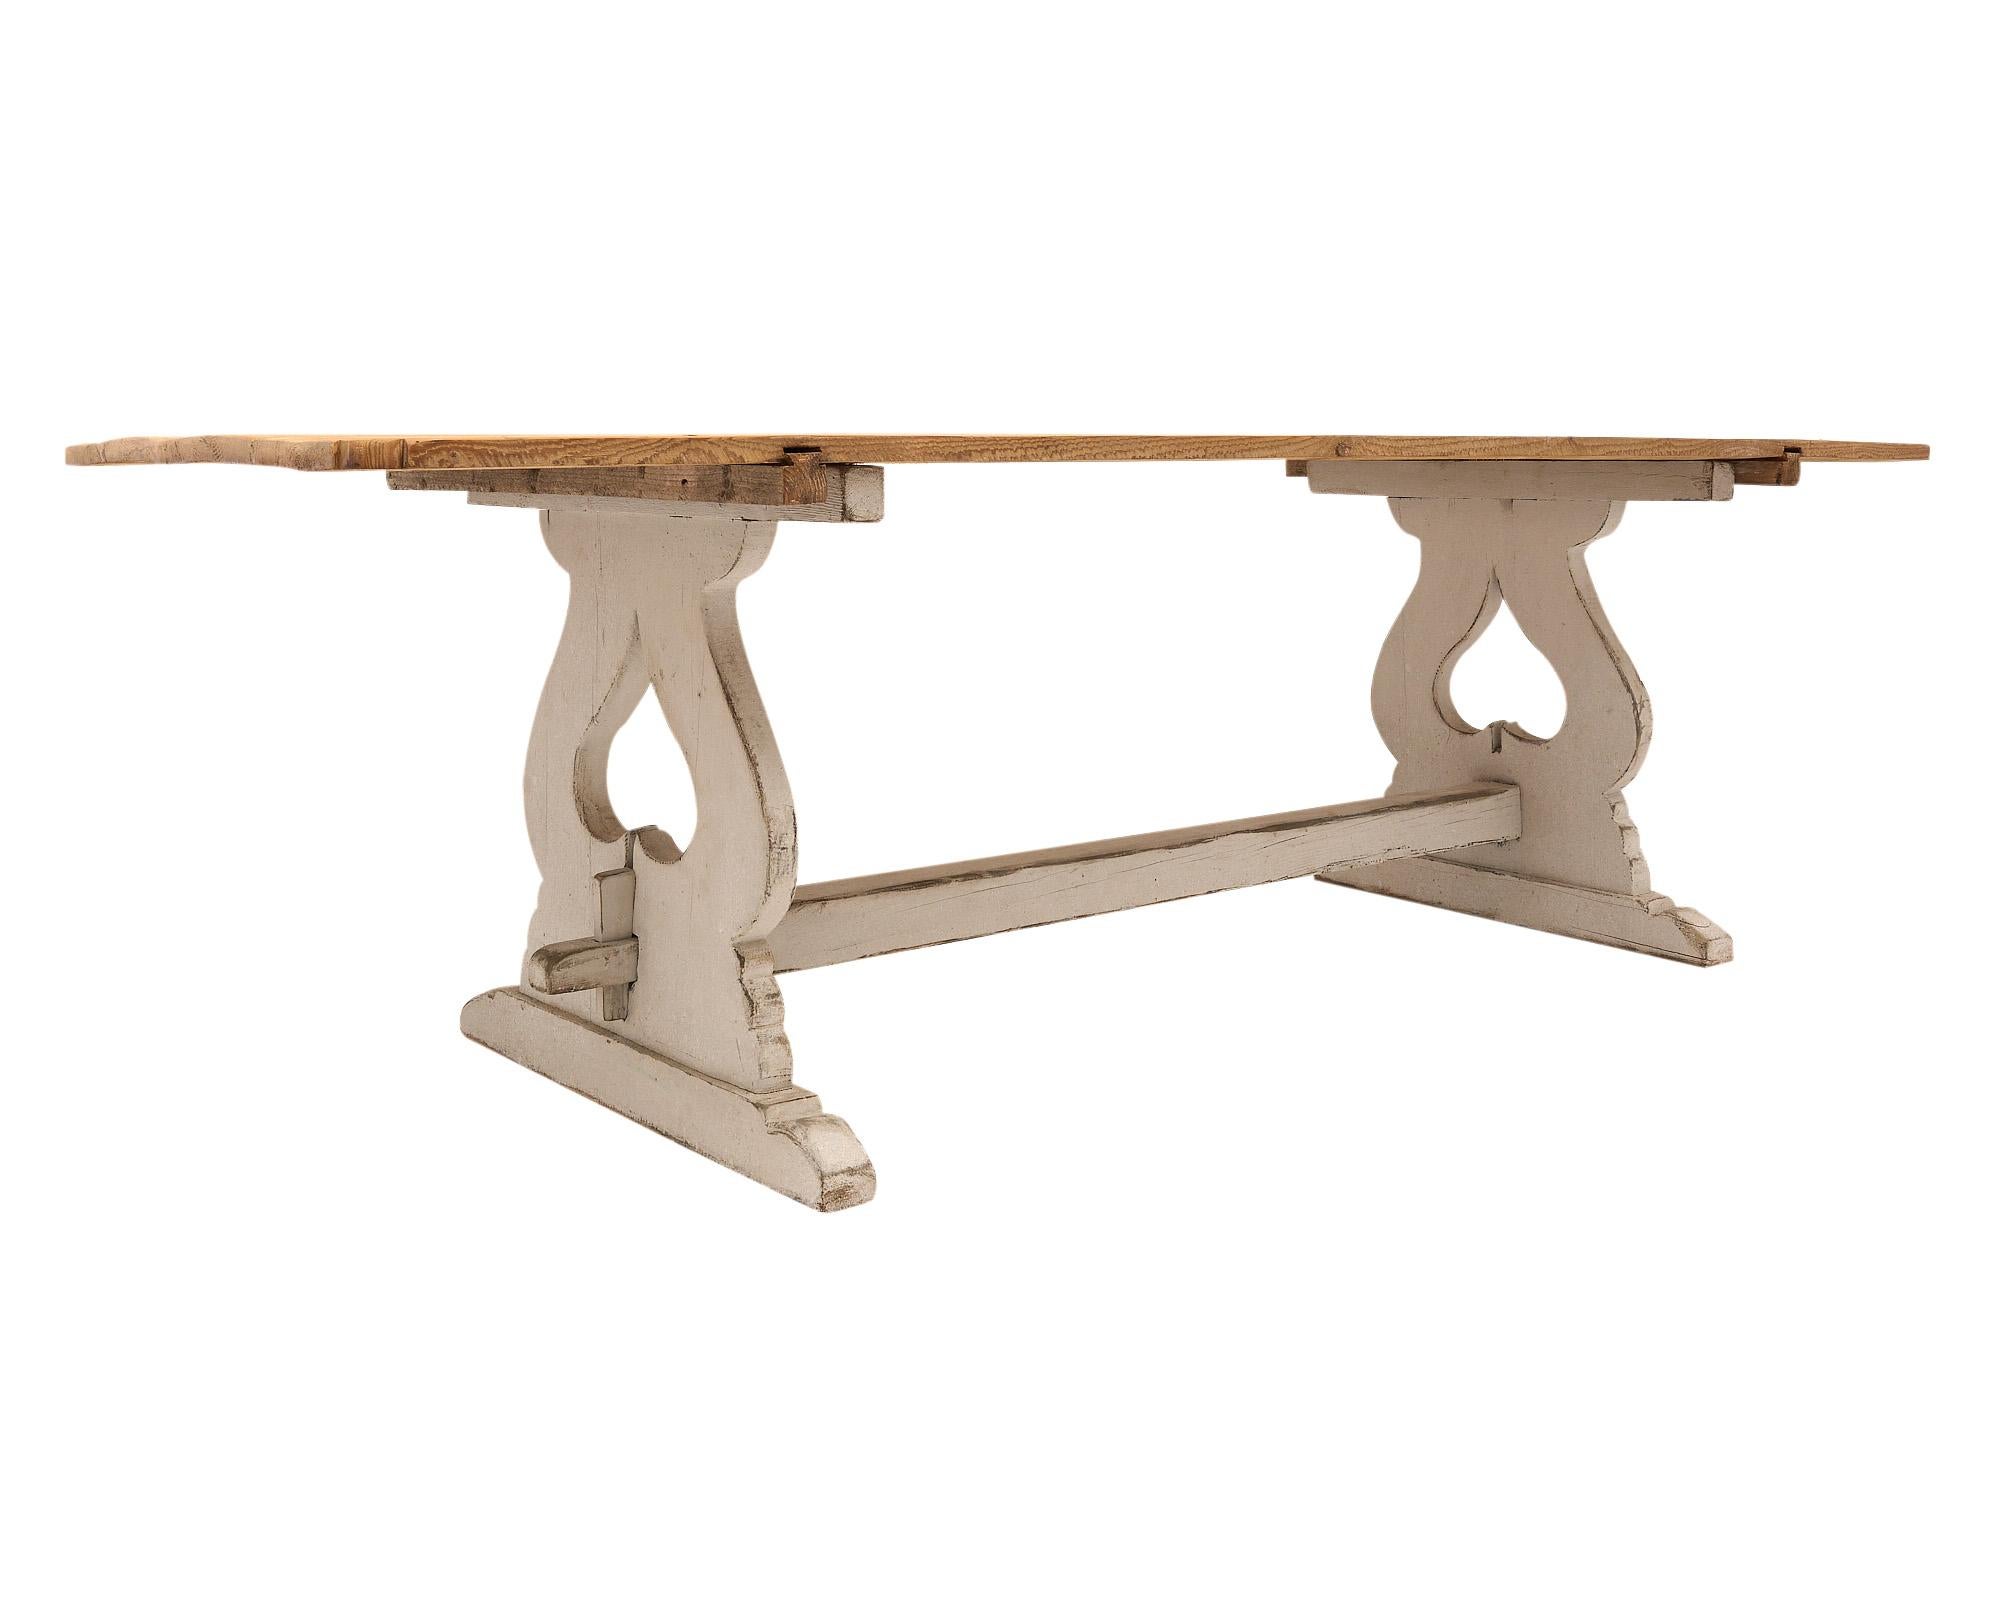 Farm table from Tuscany (Italy )with a four plank top and a painted wooden base with two Spade adorned pedestals and a stretcher. The hand carved detail of the base features the spade shape.
